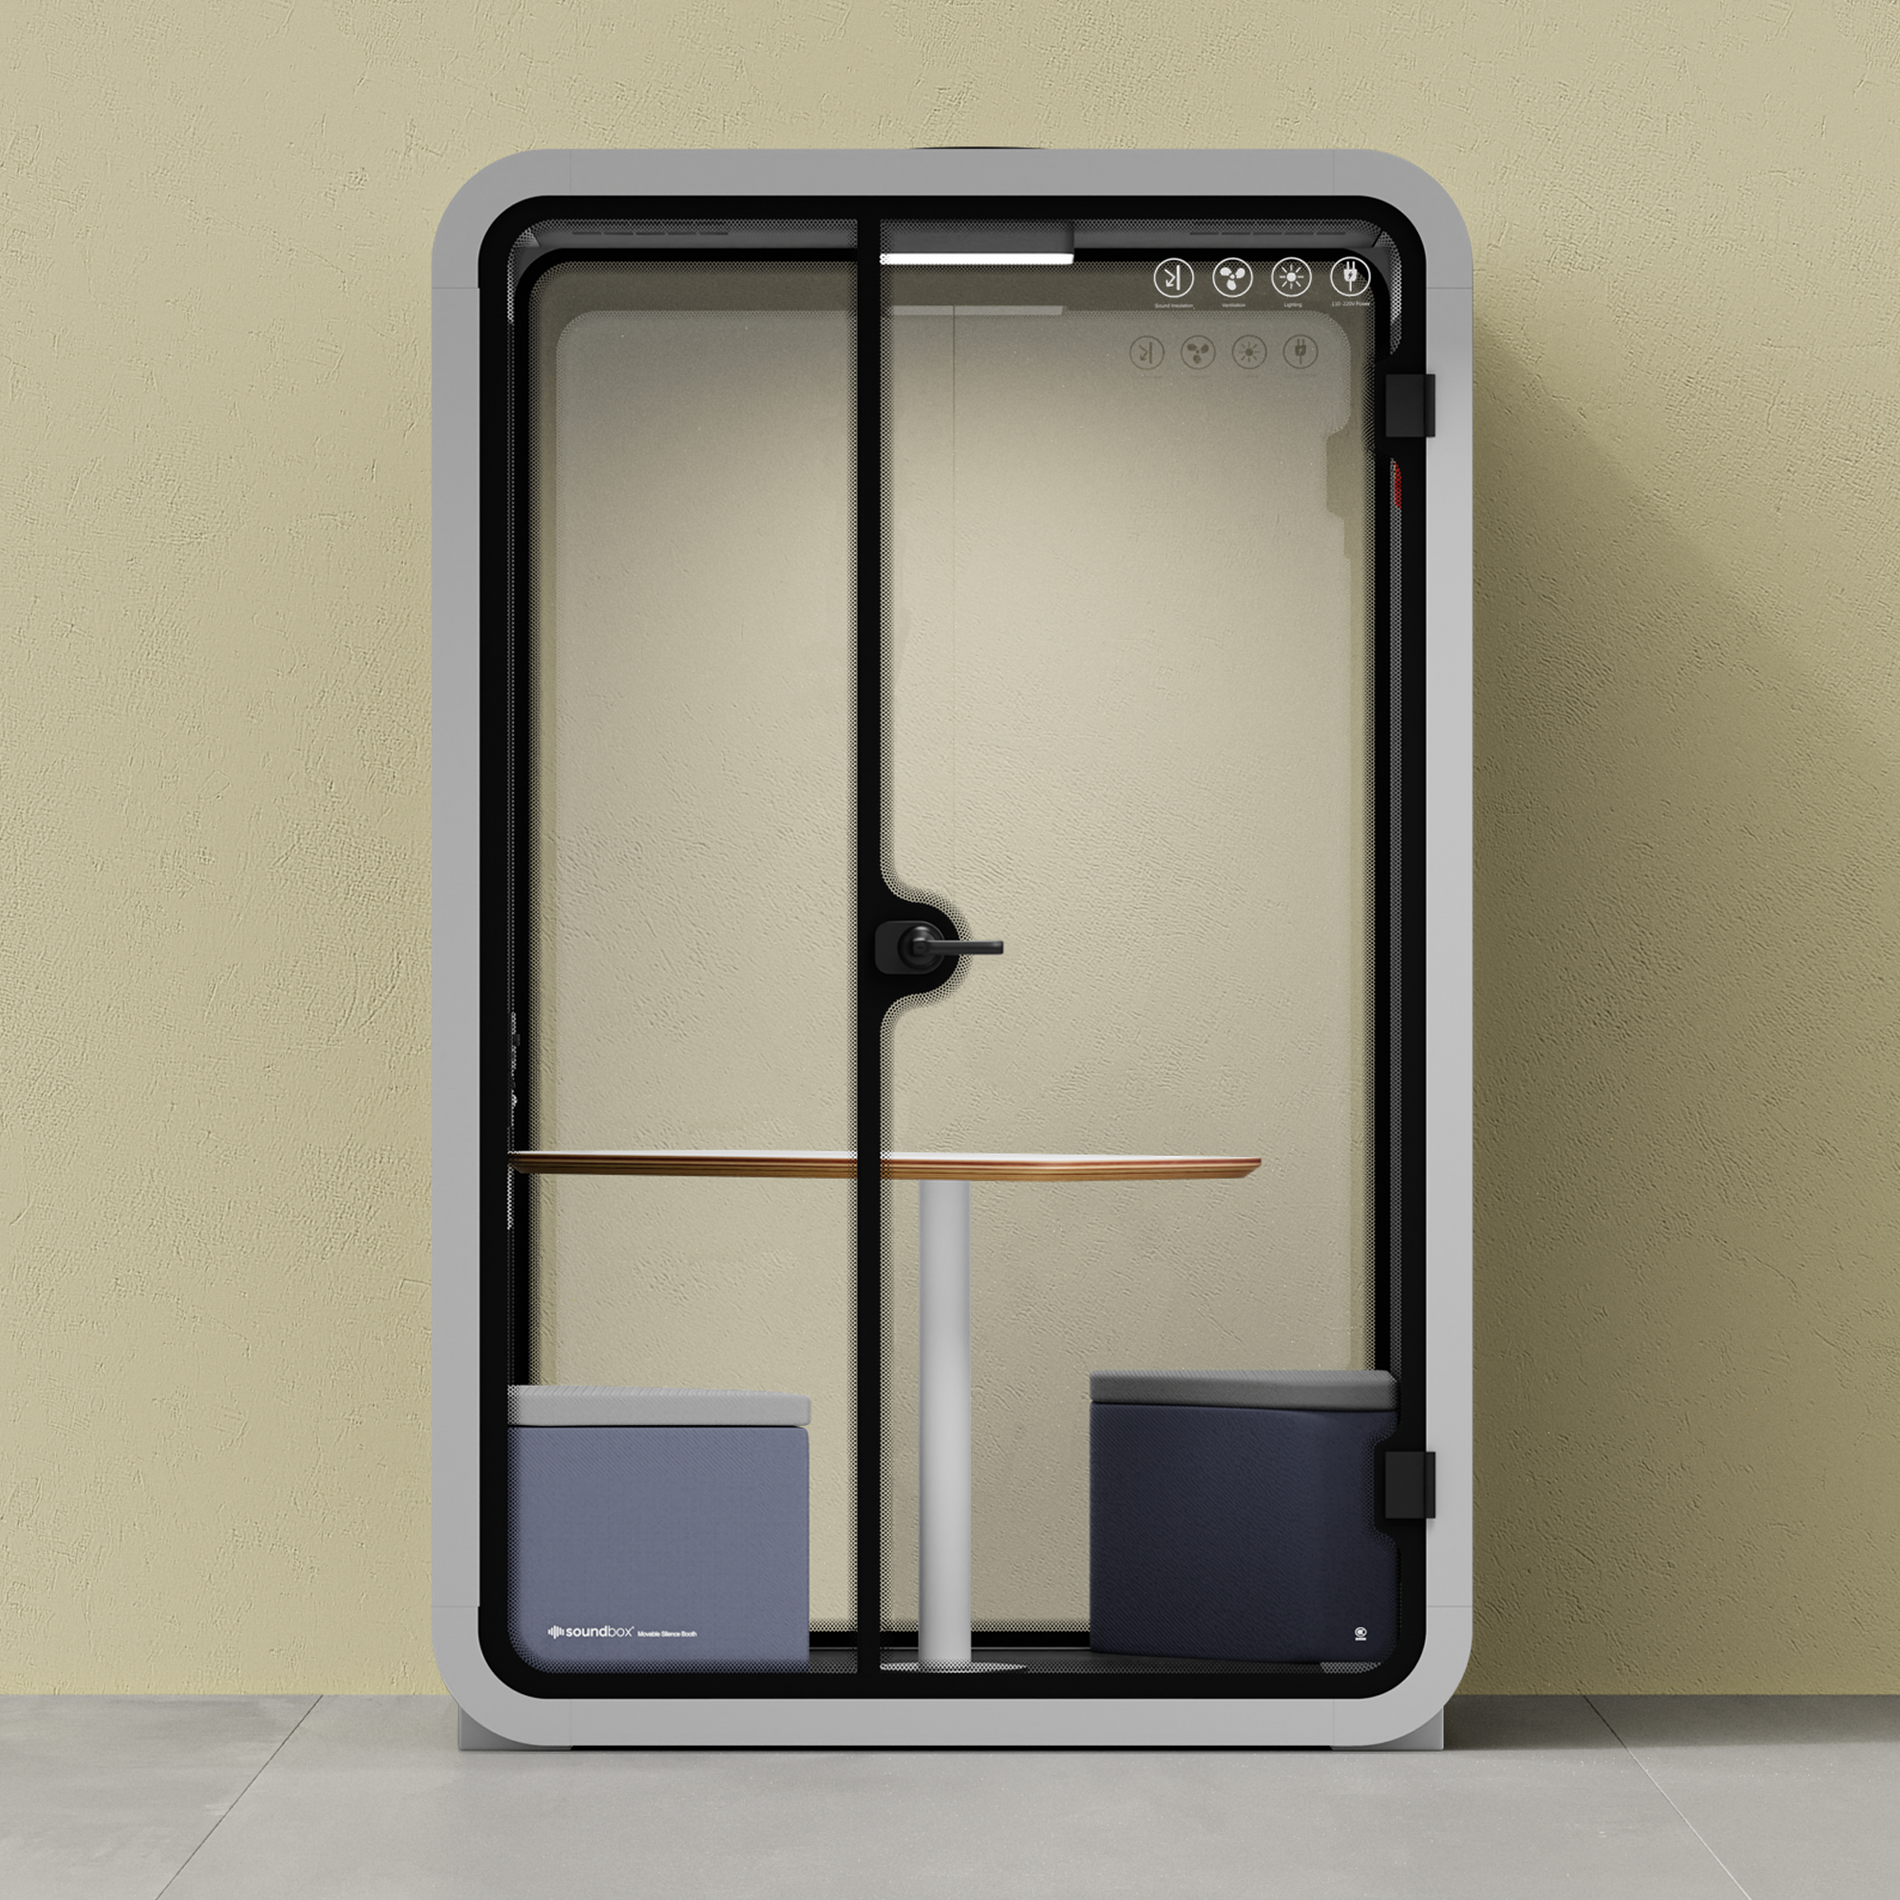 Office Phone Booth Quell - 2 PersonLight Grey / Dark Gray / Meeting Room + Table + Corner Stool